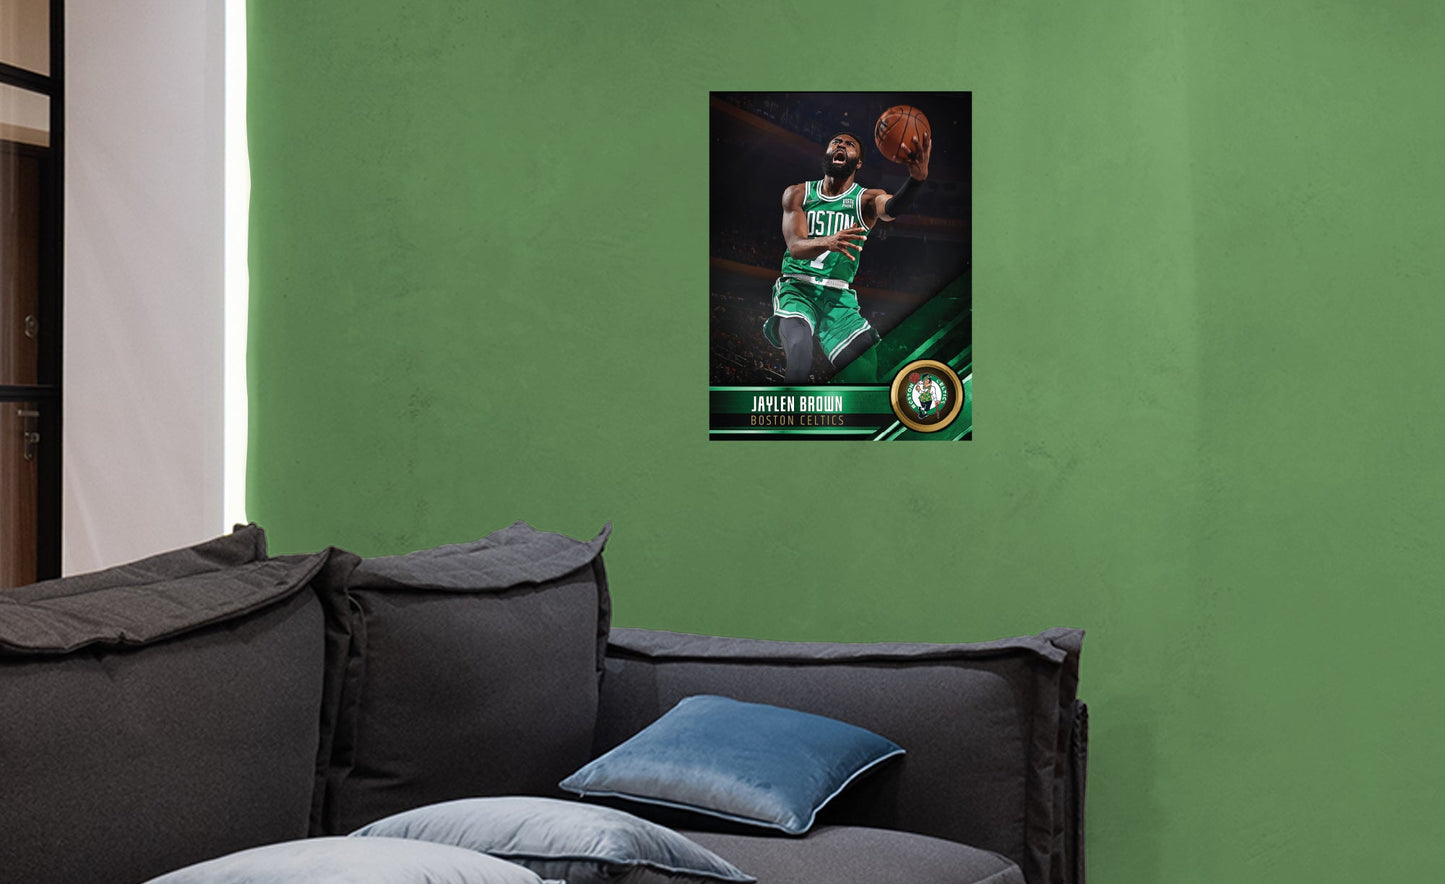 Boston Celtics: Jaylen Brown Poster - Officially Licensed NBA Removable Adhesive Decal